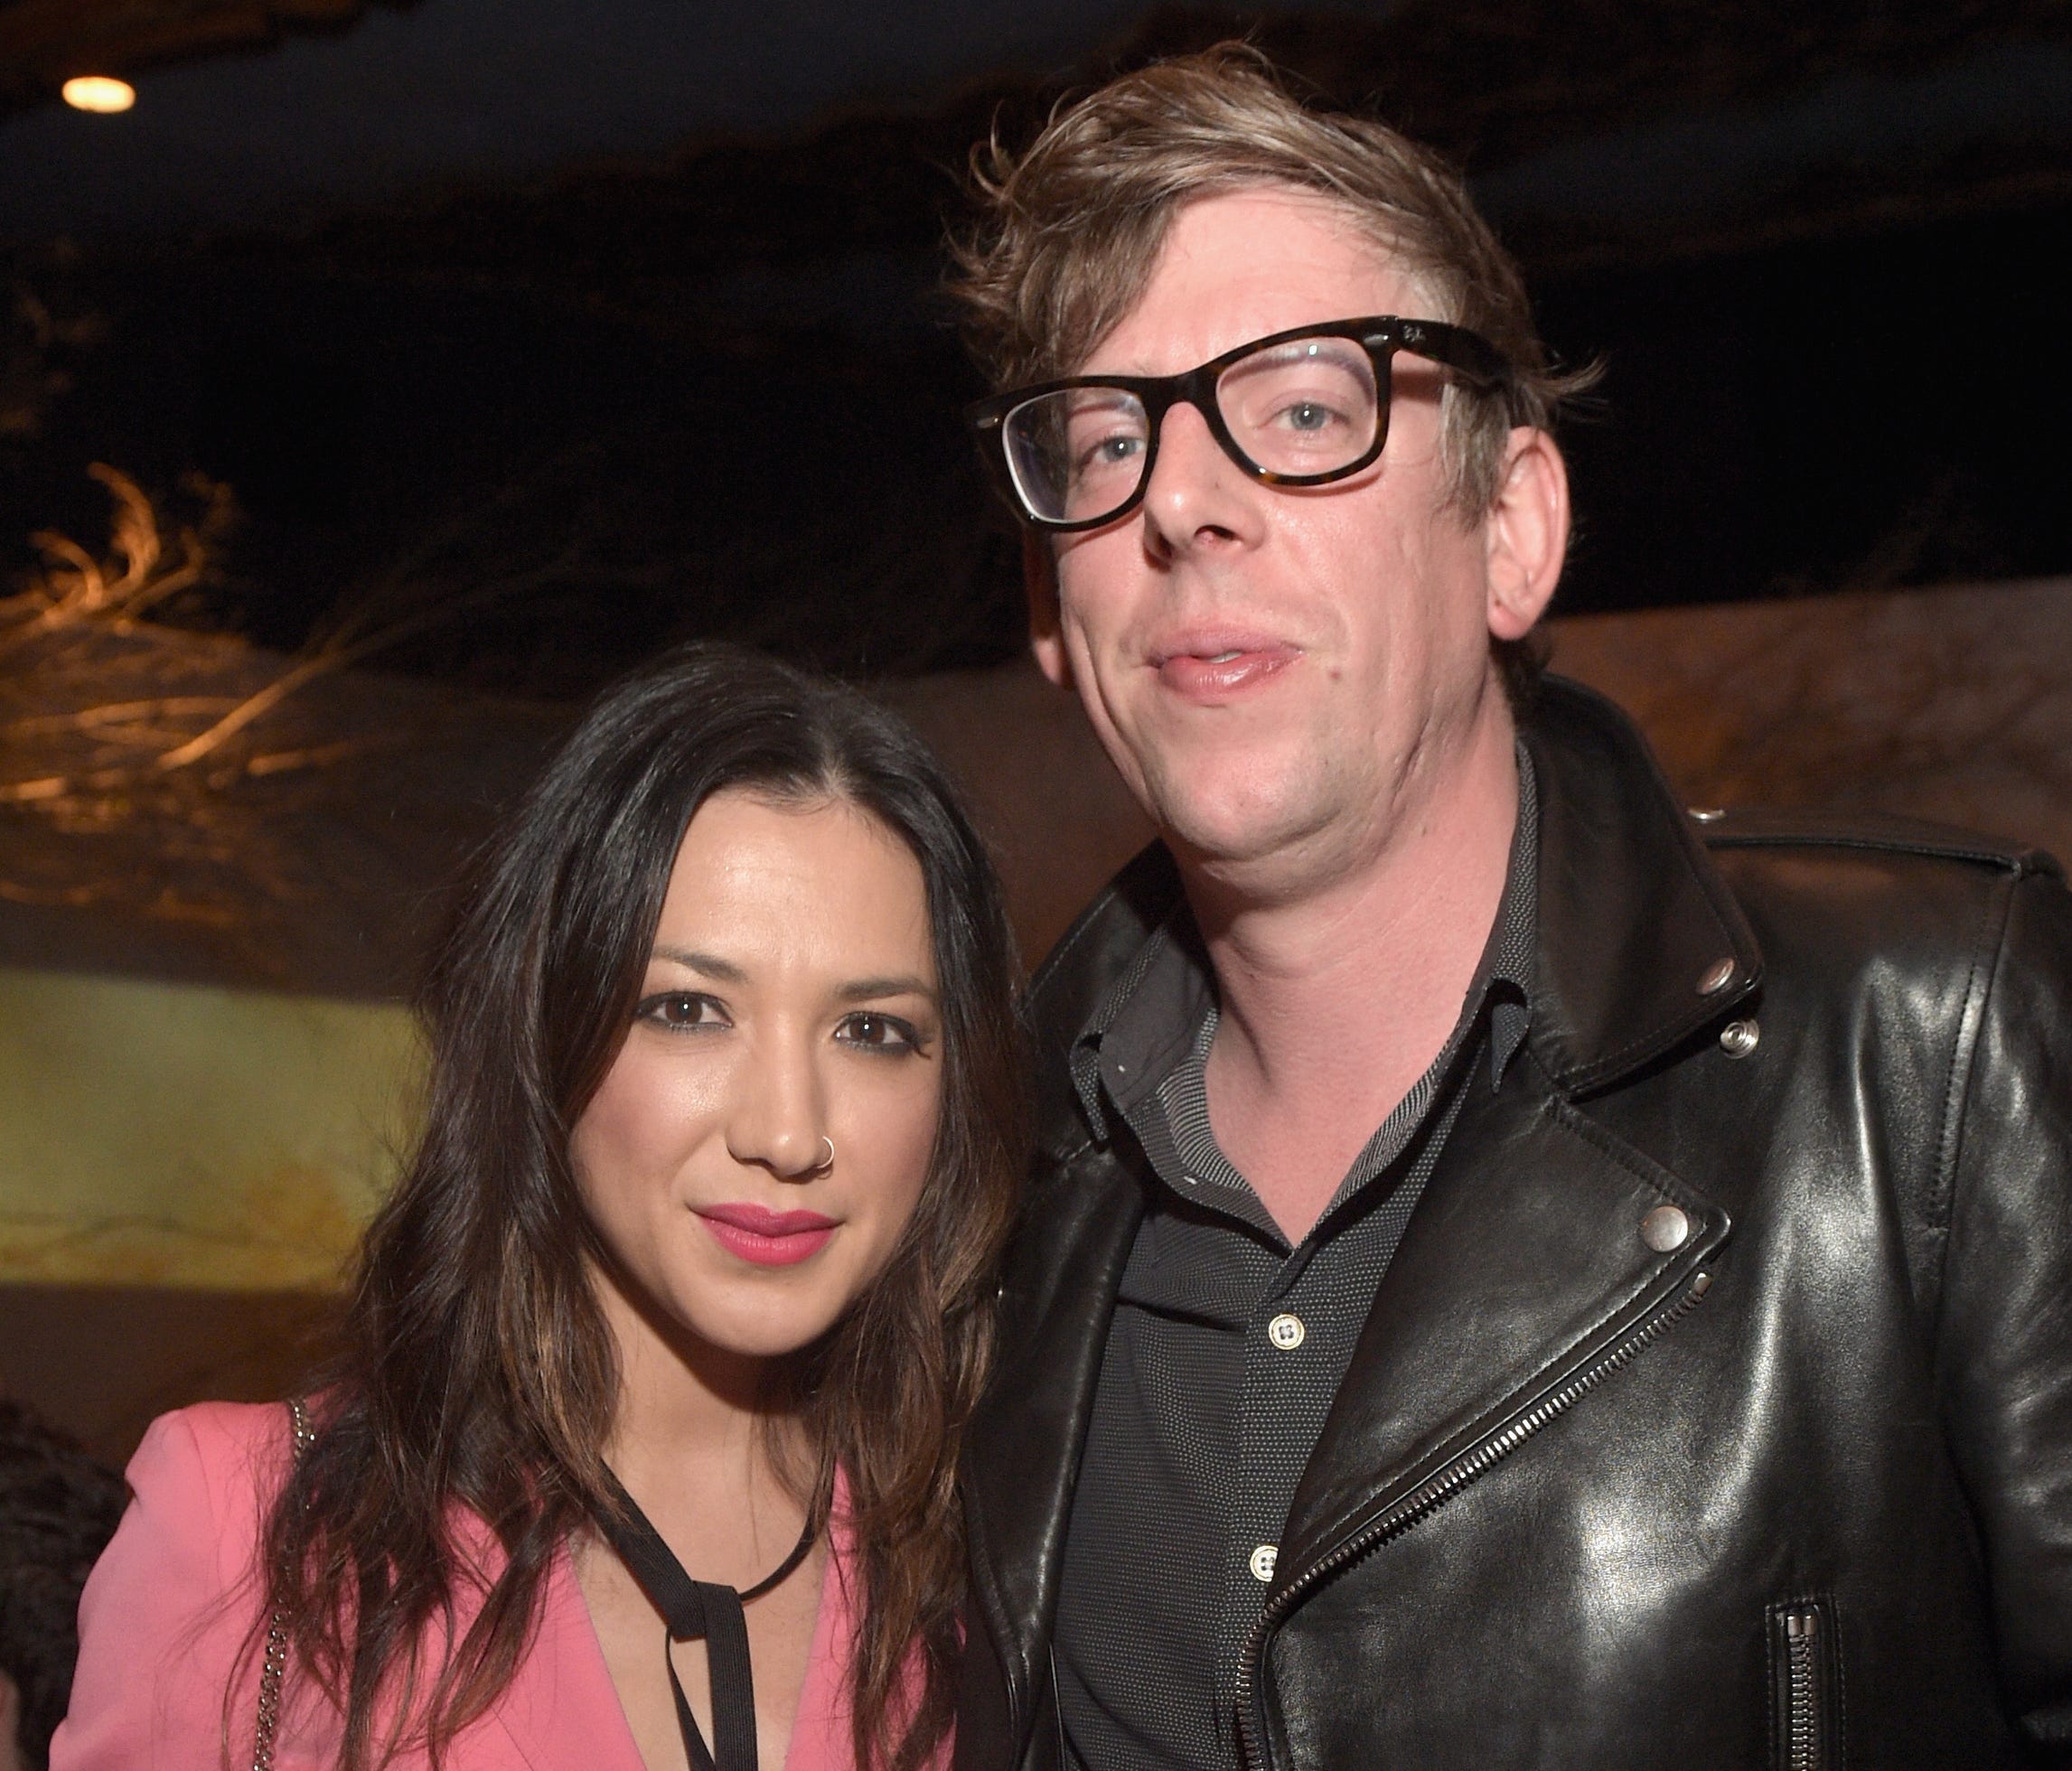 Michelle Branch and Patrick Carney are engaged, Branch announced Monday.